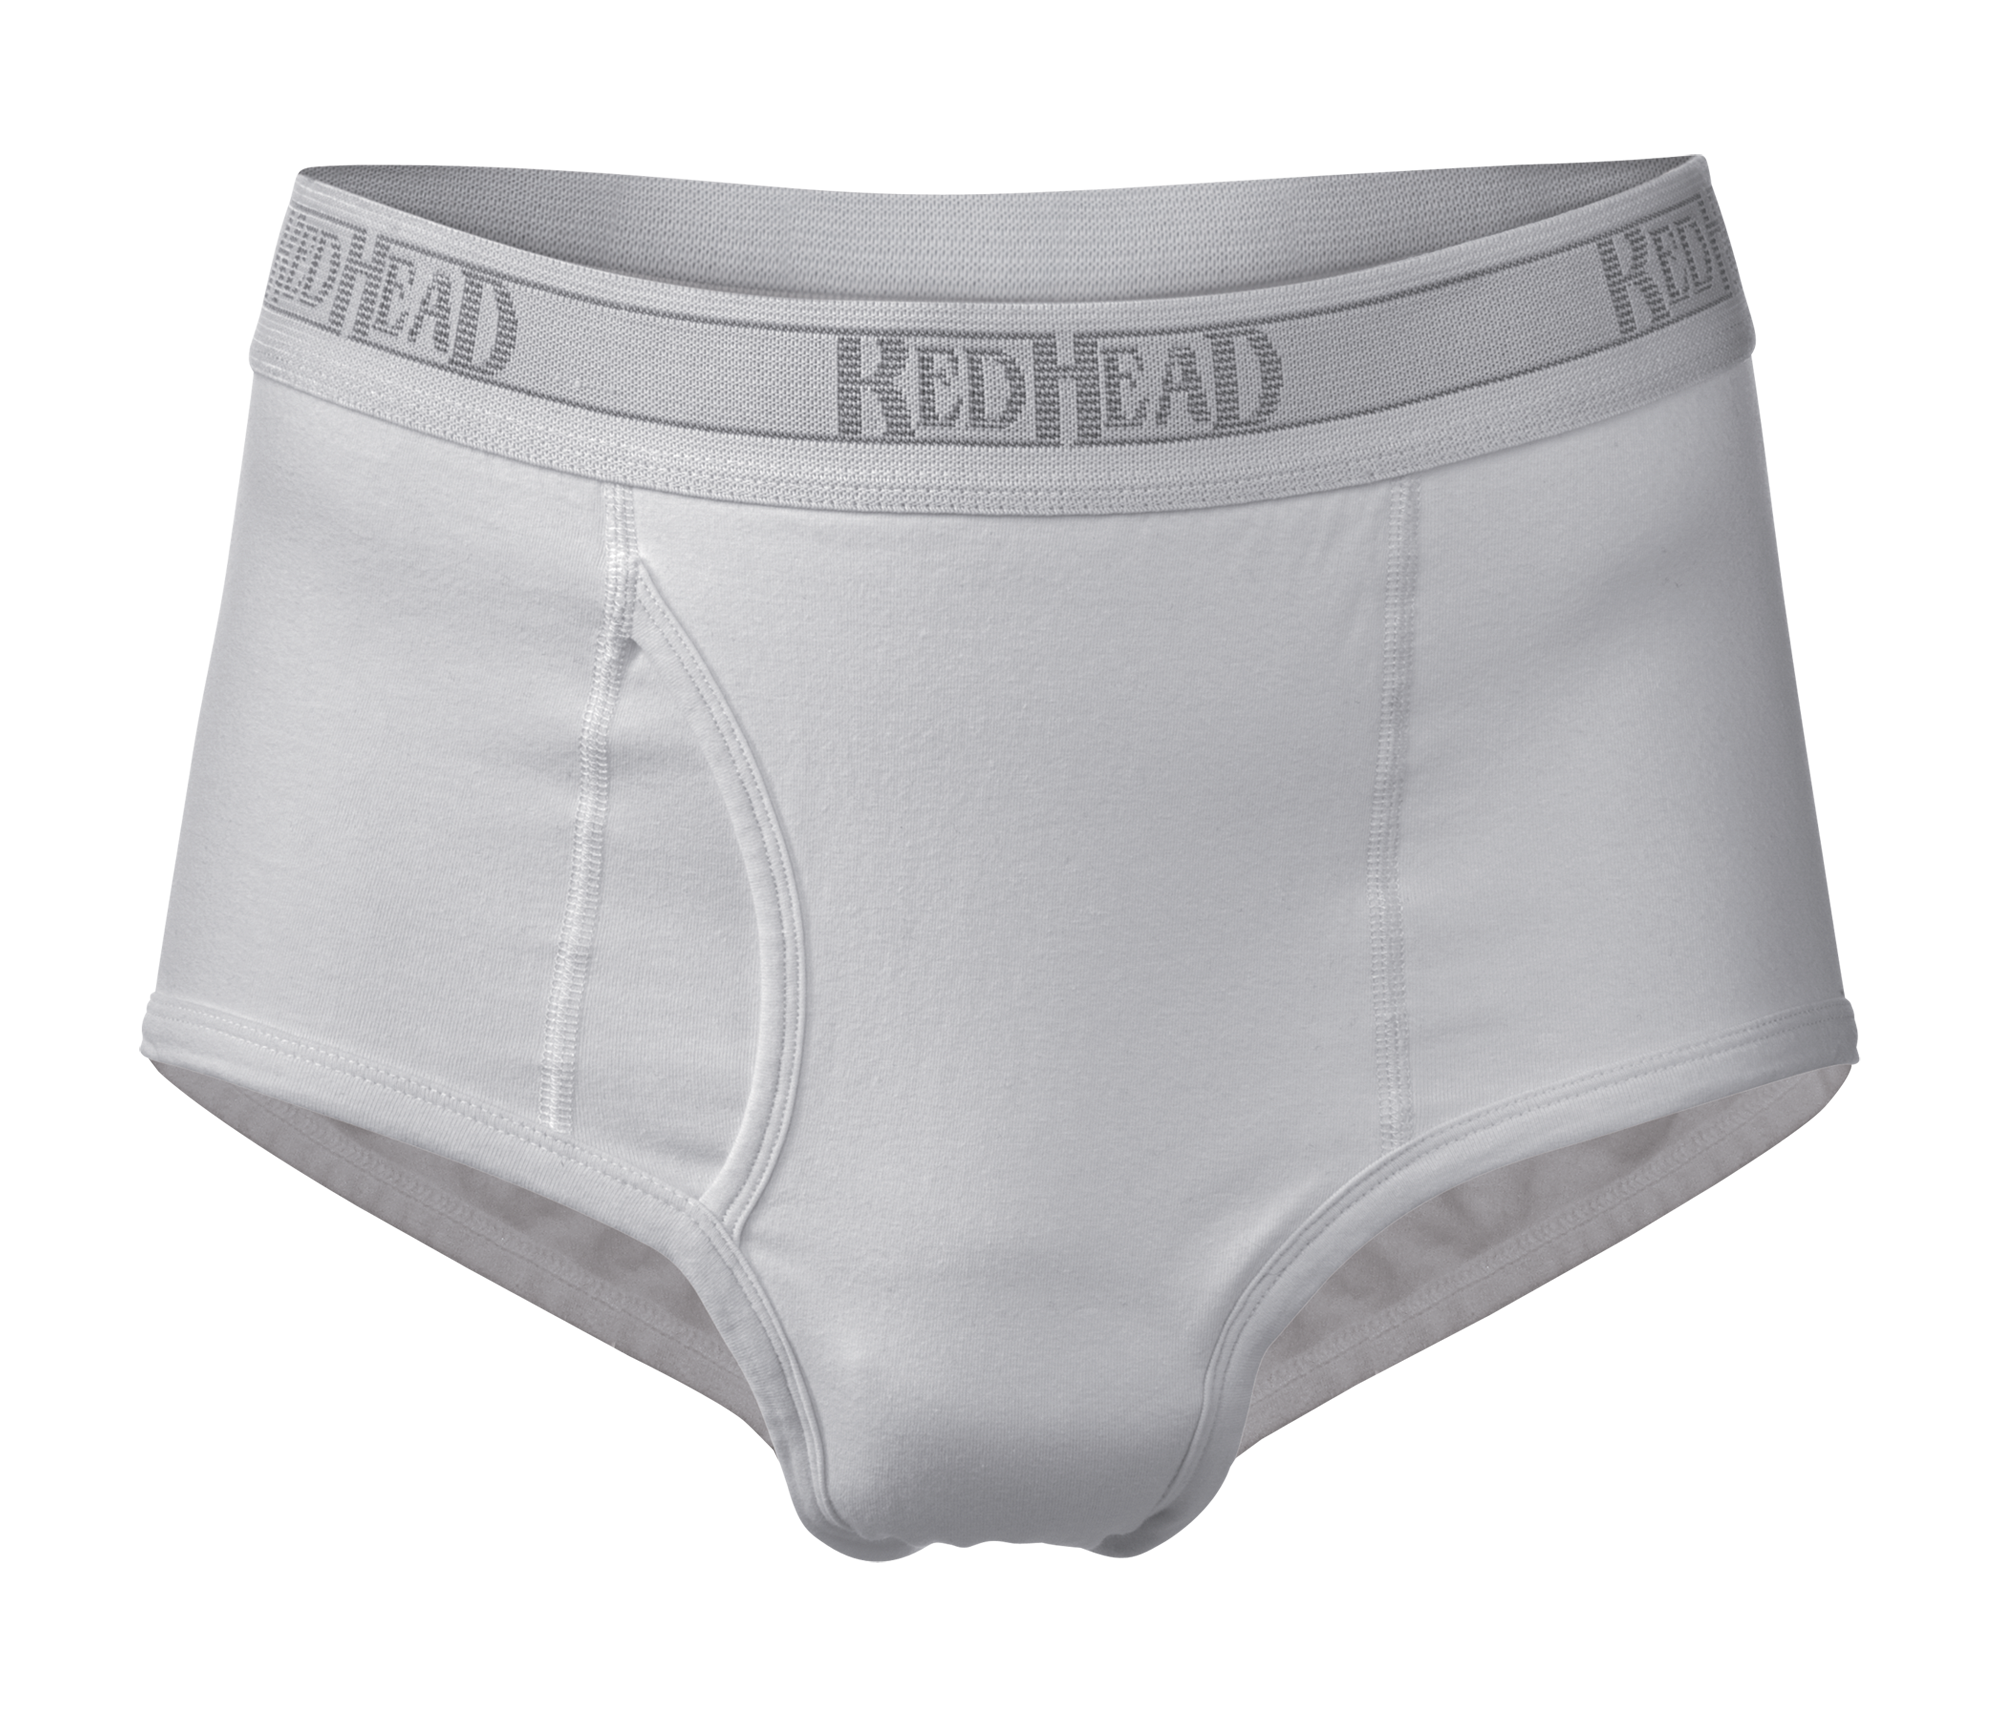 RedHead Skivvies Briefs for Men - Two-Pack